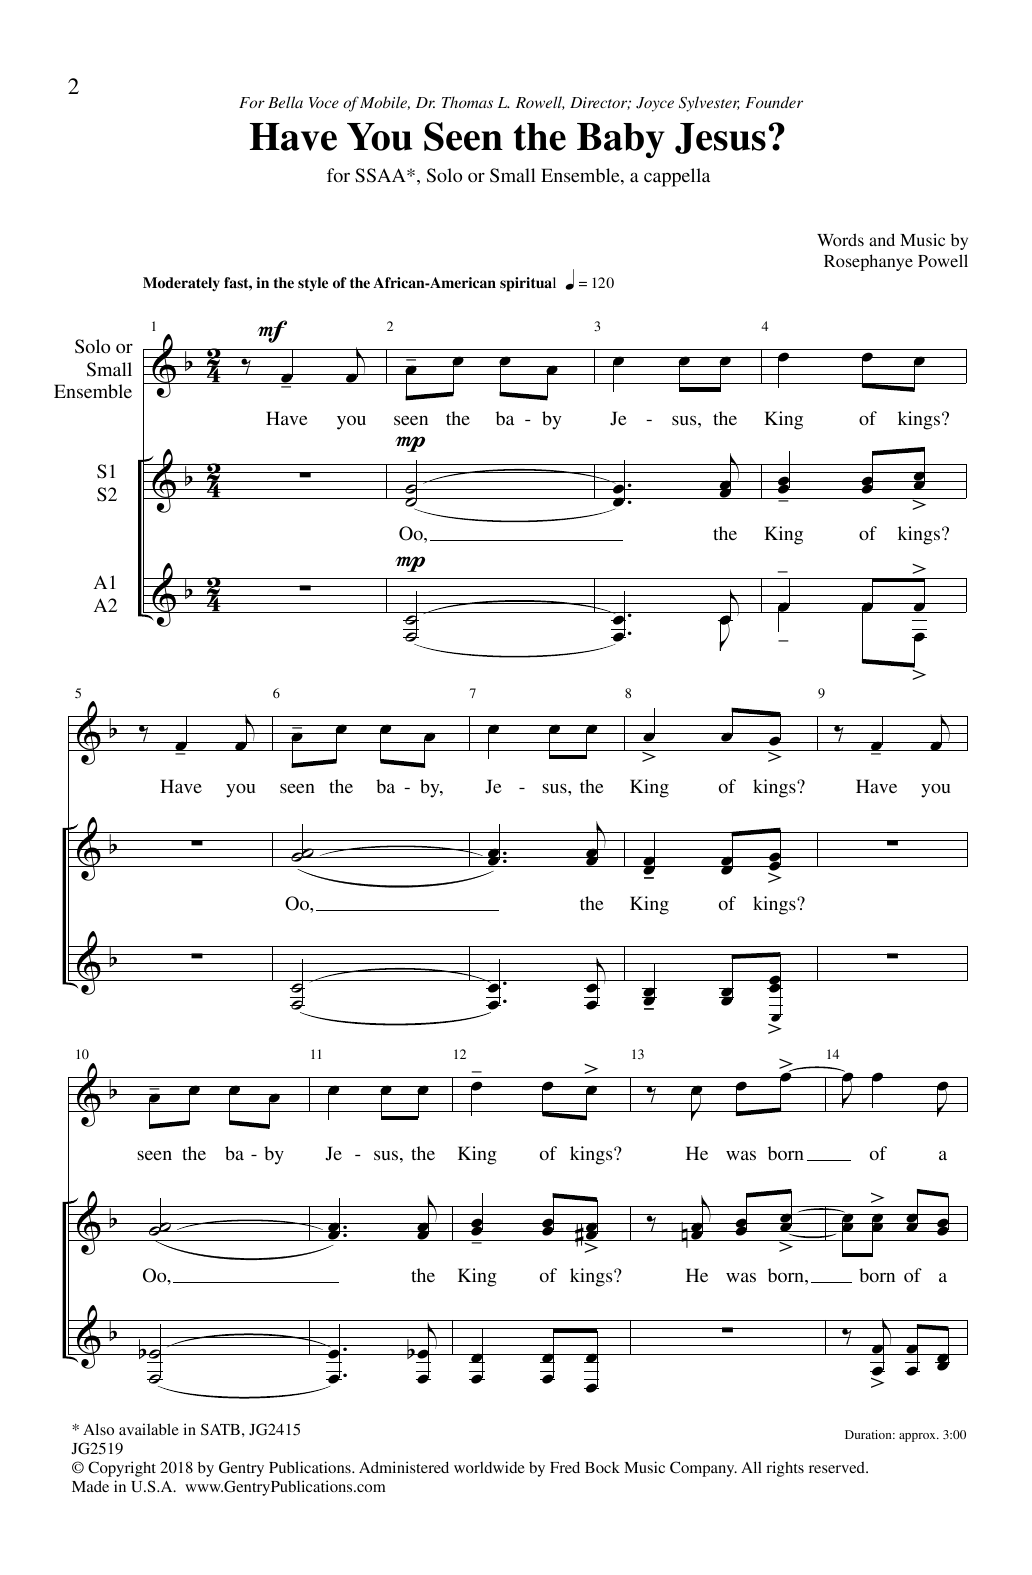 Download Rosephanye Powell Have You Seen The Baby Jesus Sheet Music